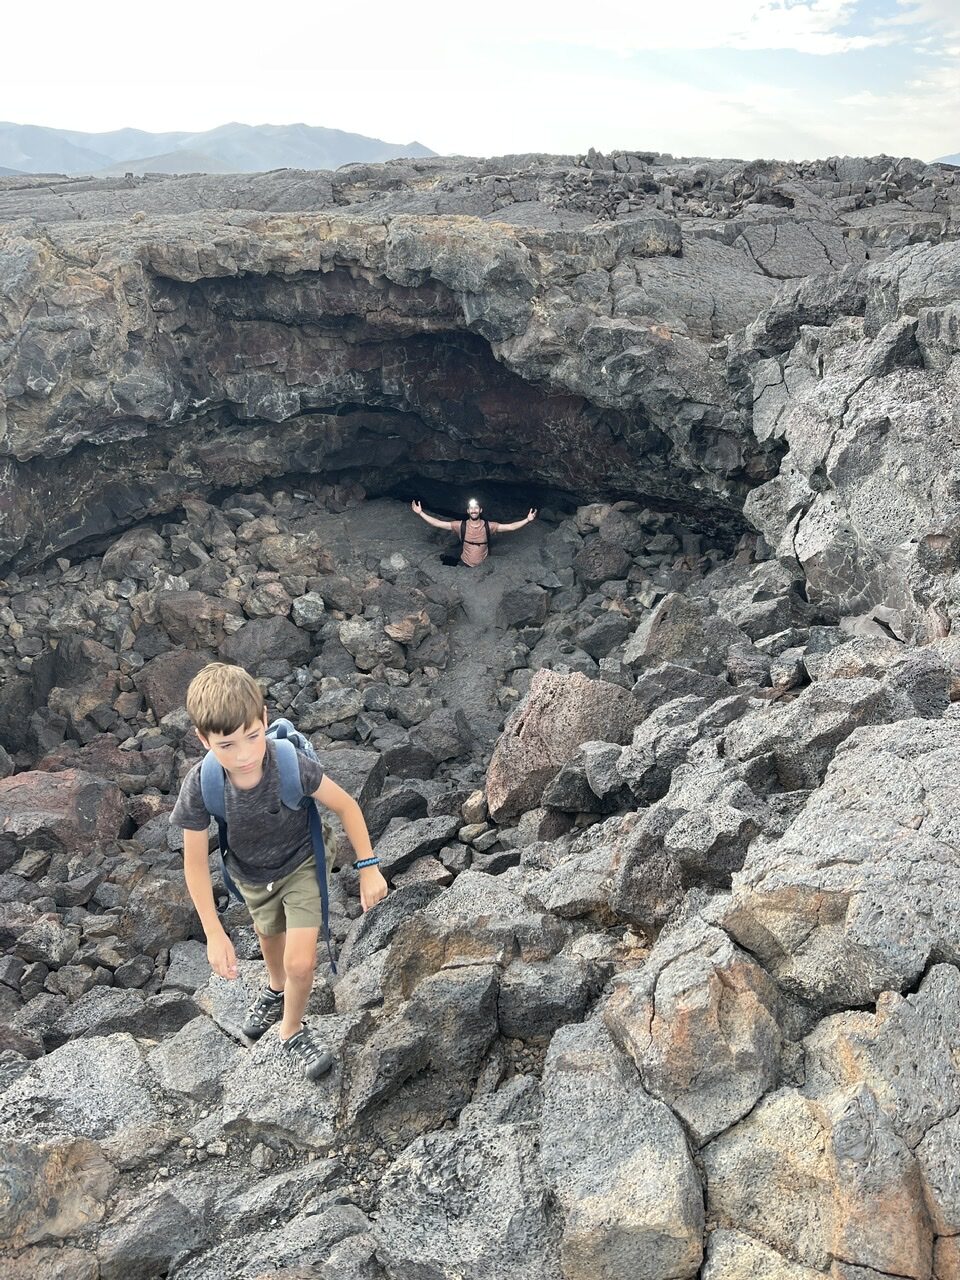 How to exit out of the Indian Tunnel at Craters of the moon national monument